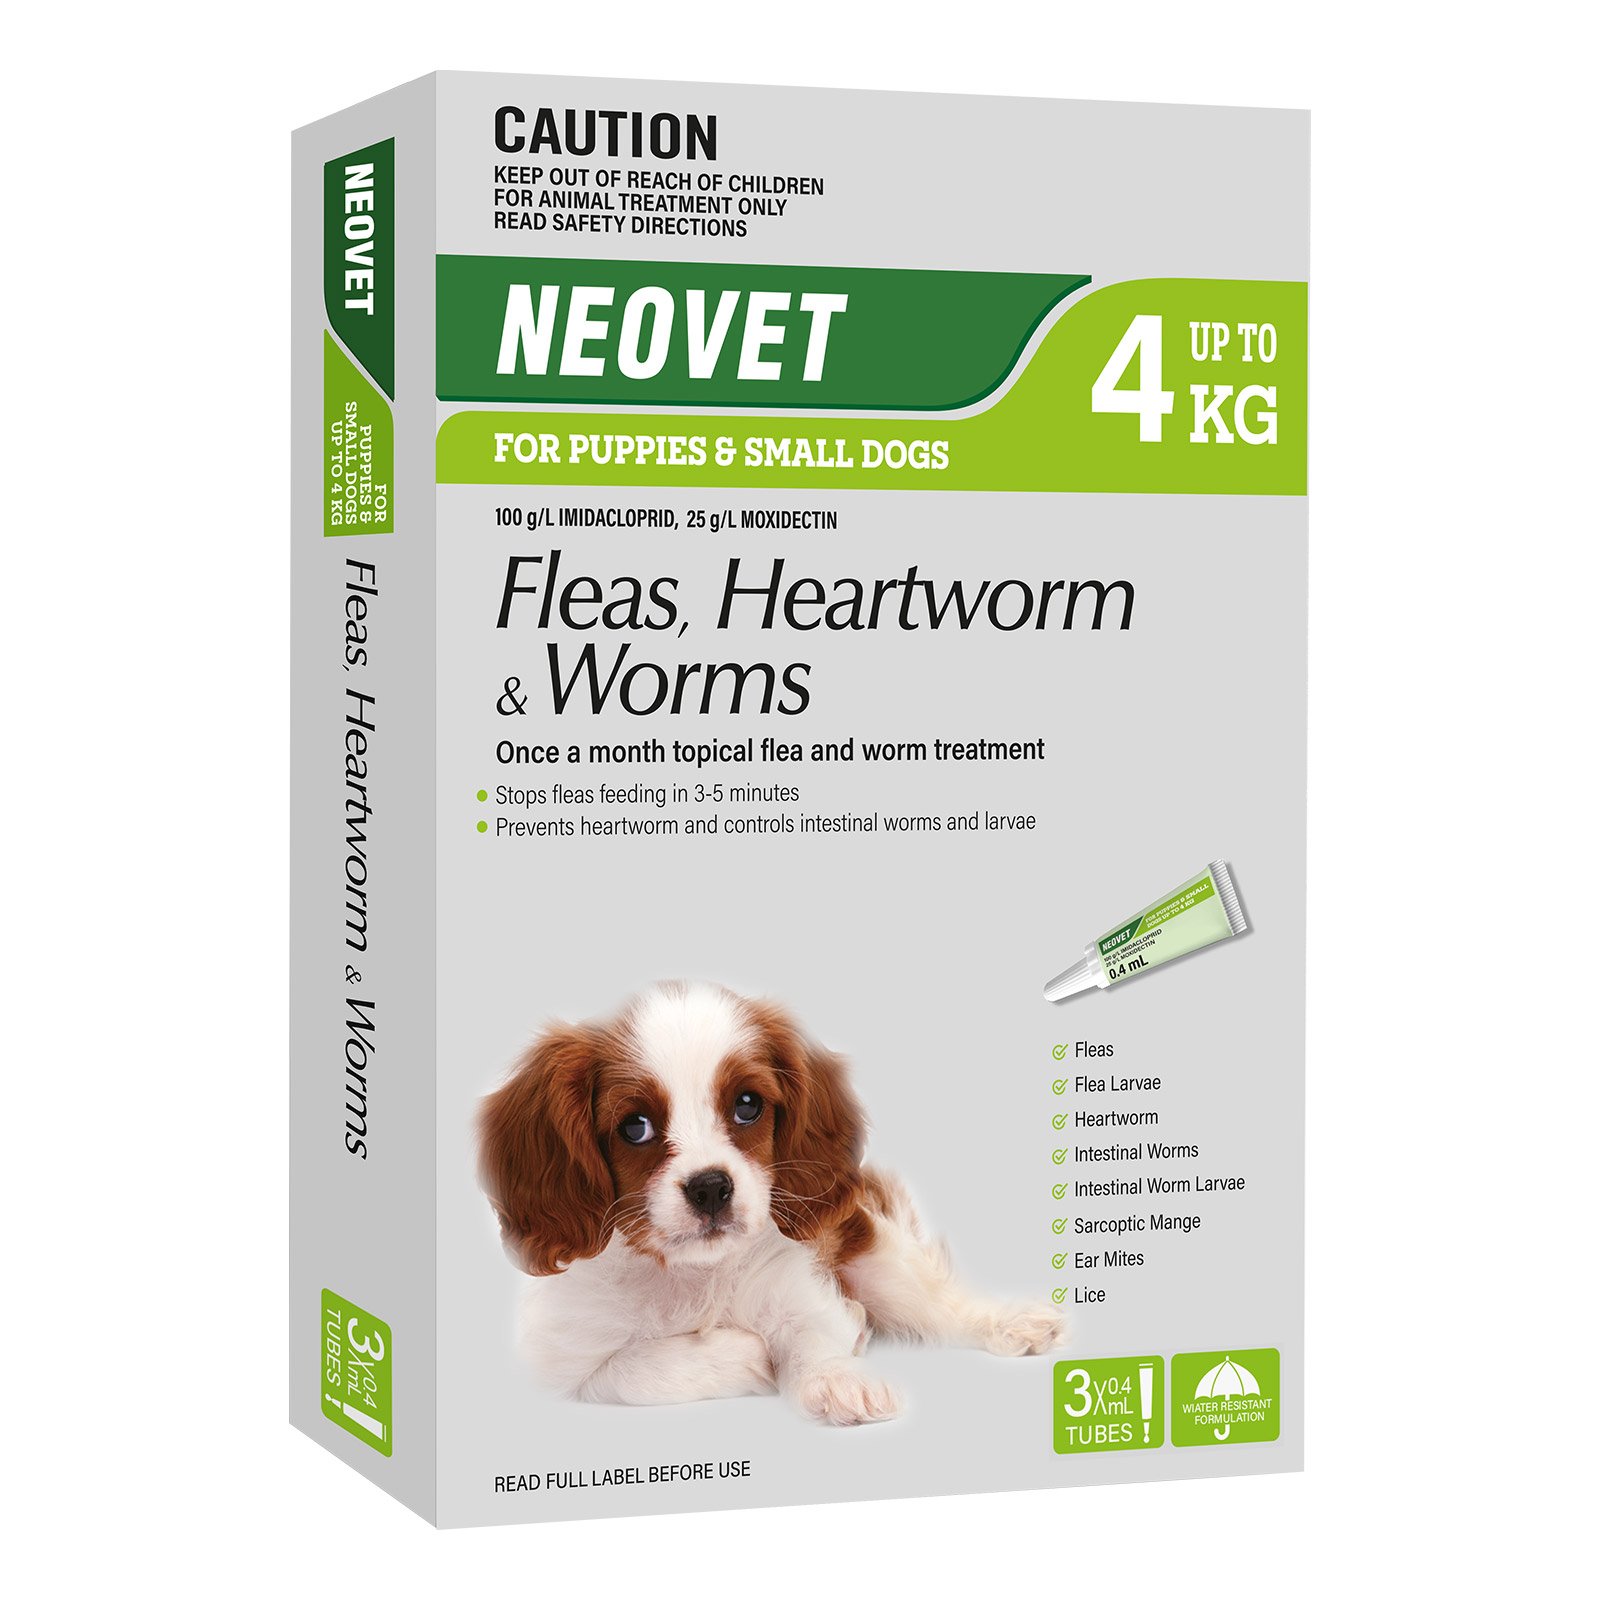 neovet-for-puppies-and-small-dogs-up-to-4kg-3tubes_08102023_205942.jpg